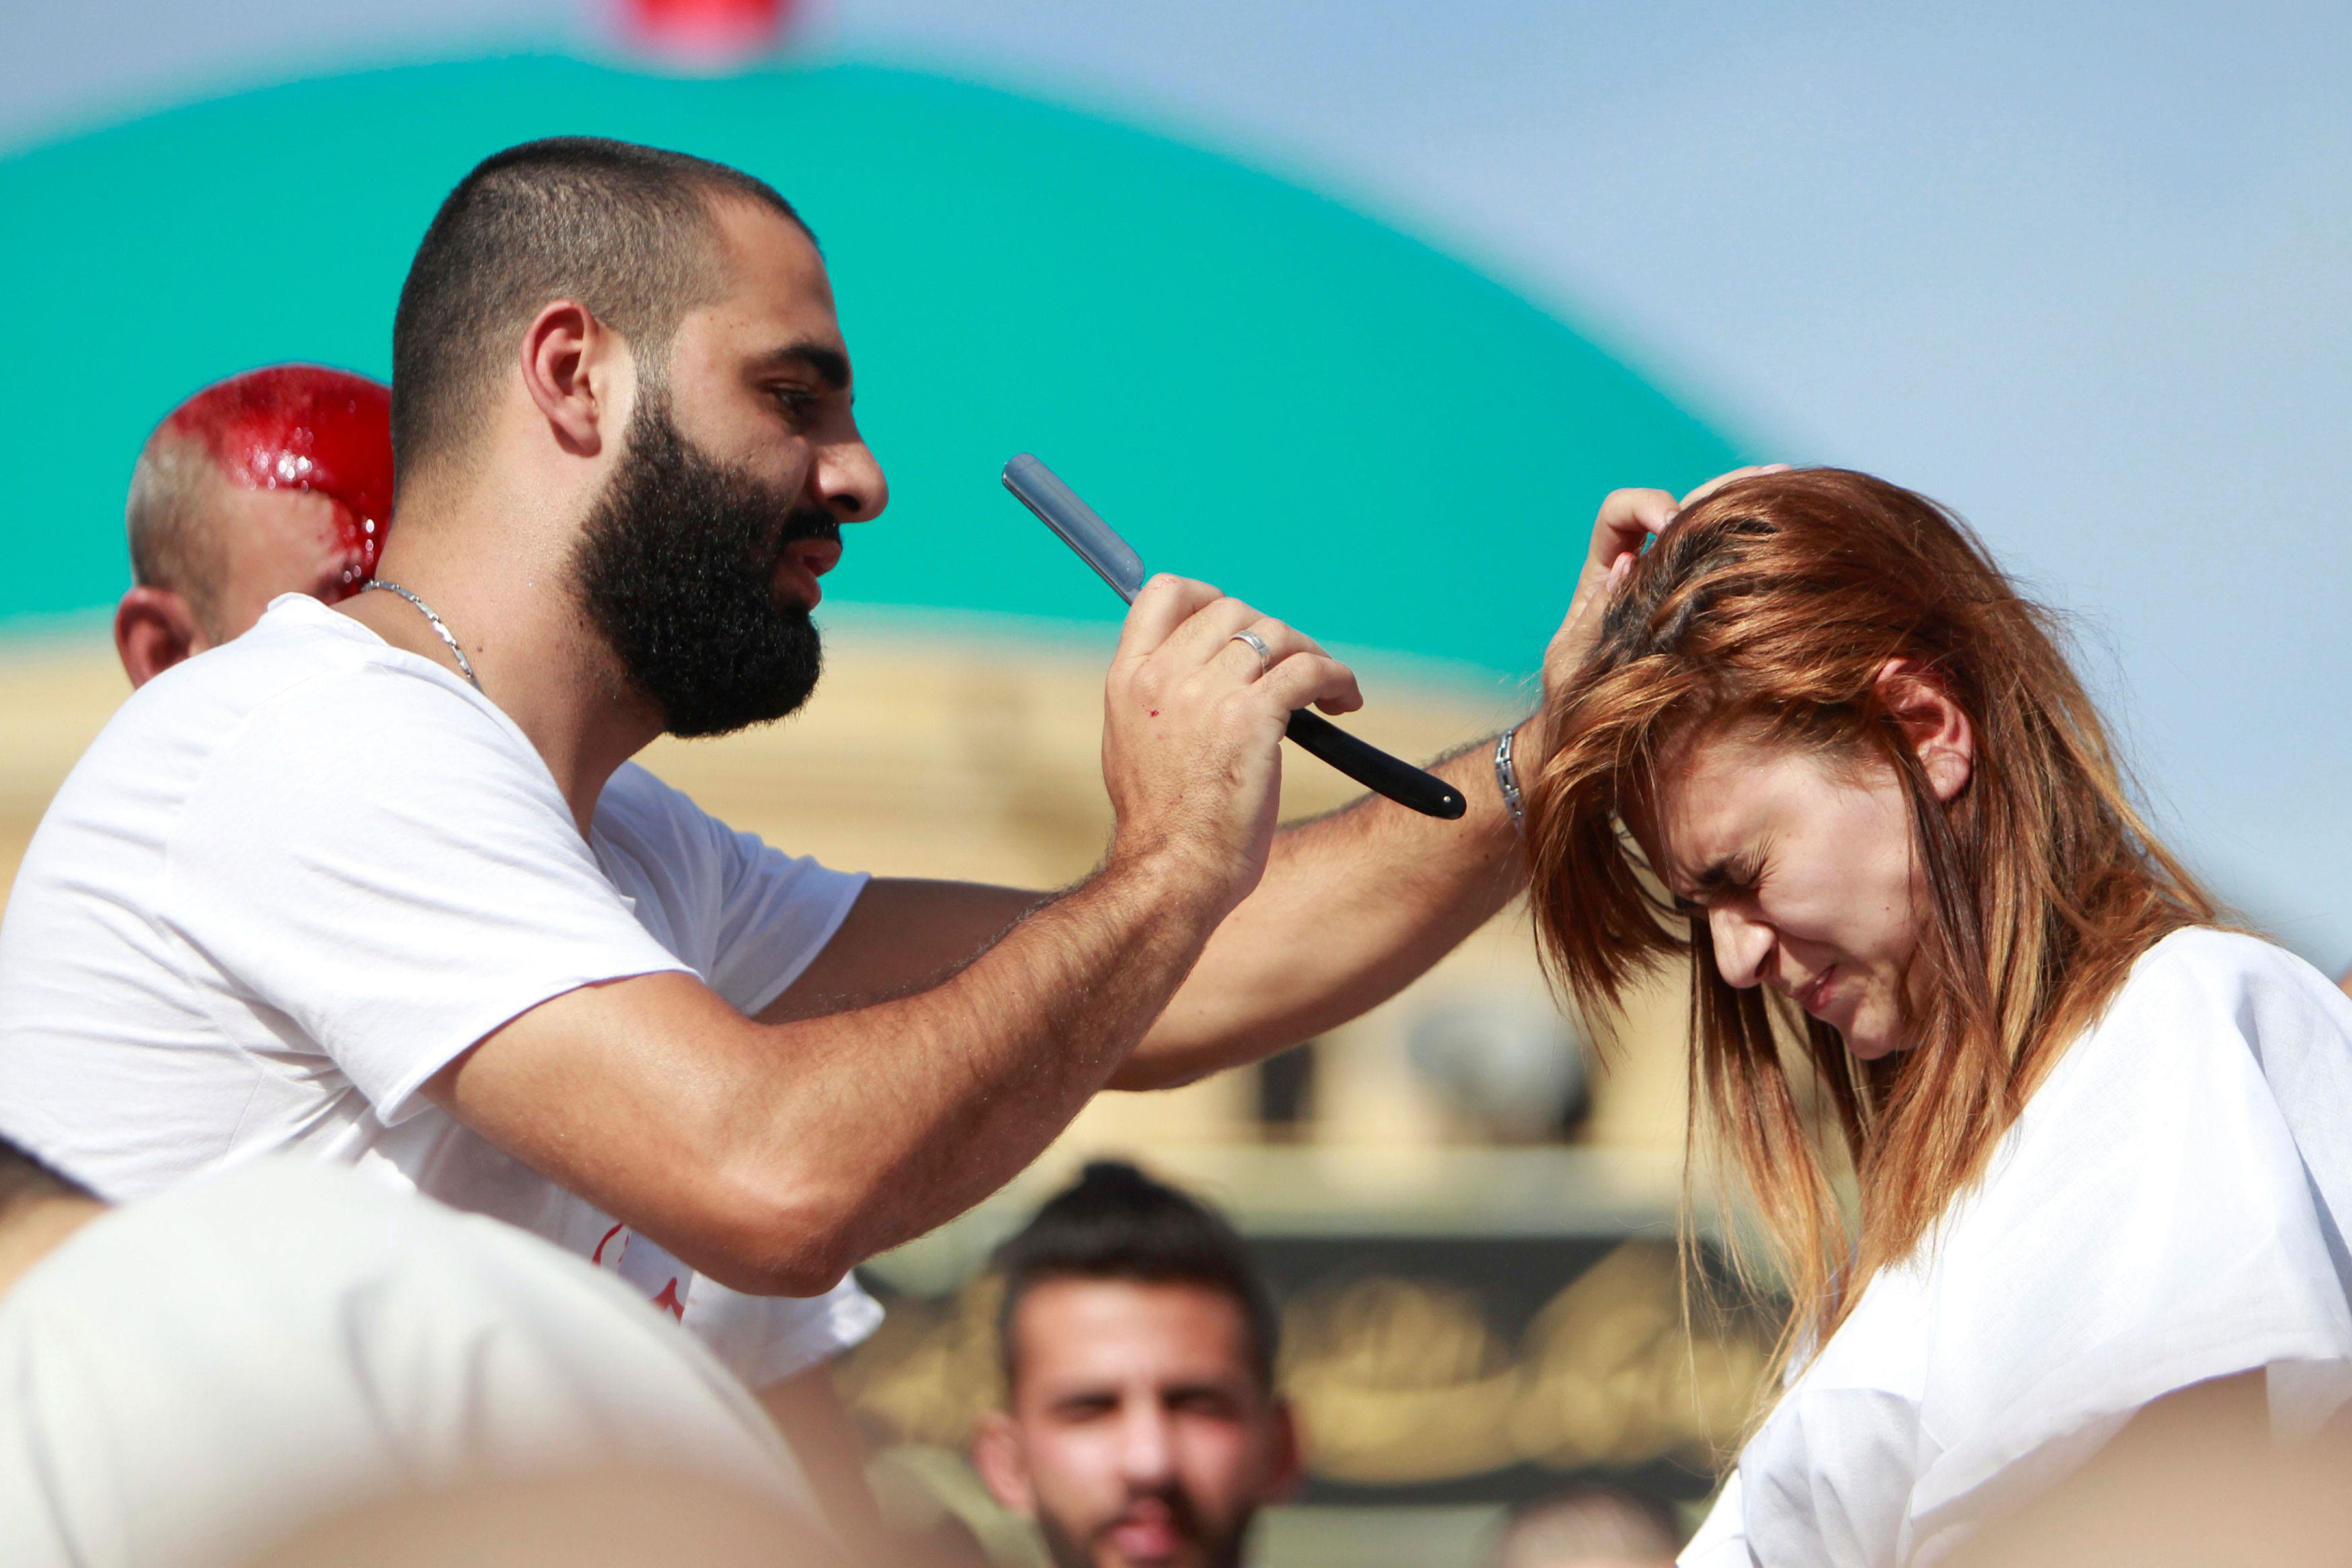 A Shi'ite Muslim attempts to tap the head of a woman with a razor to draw blood during a religious p